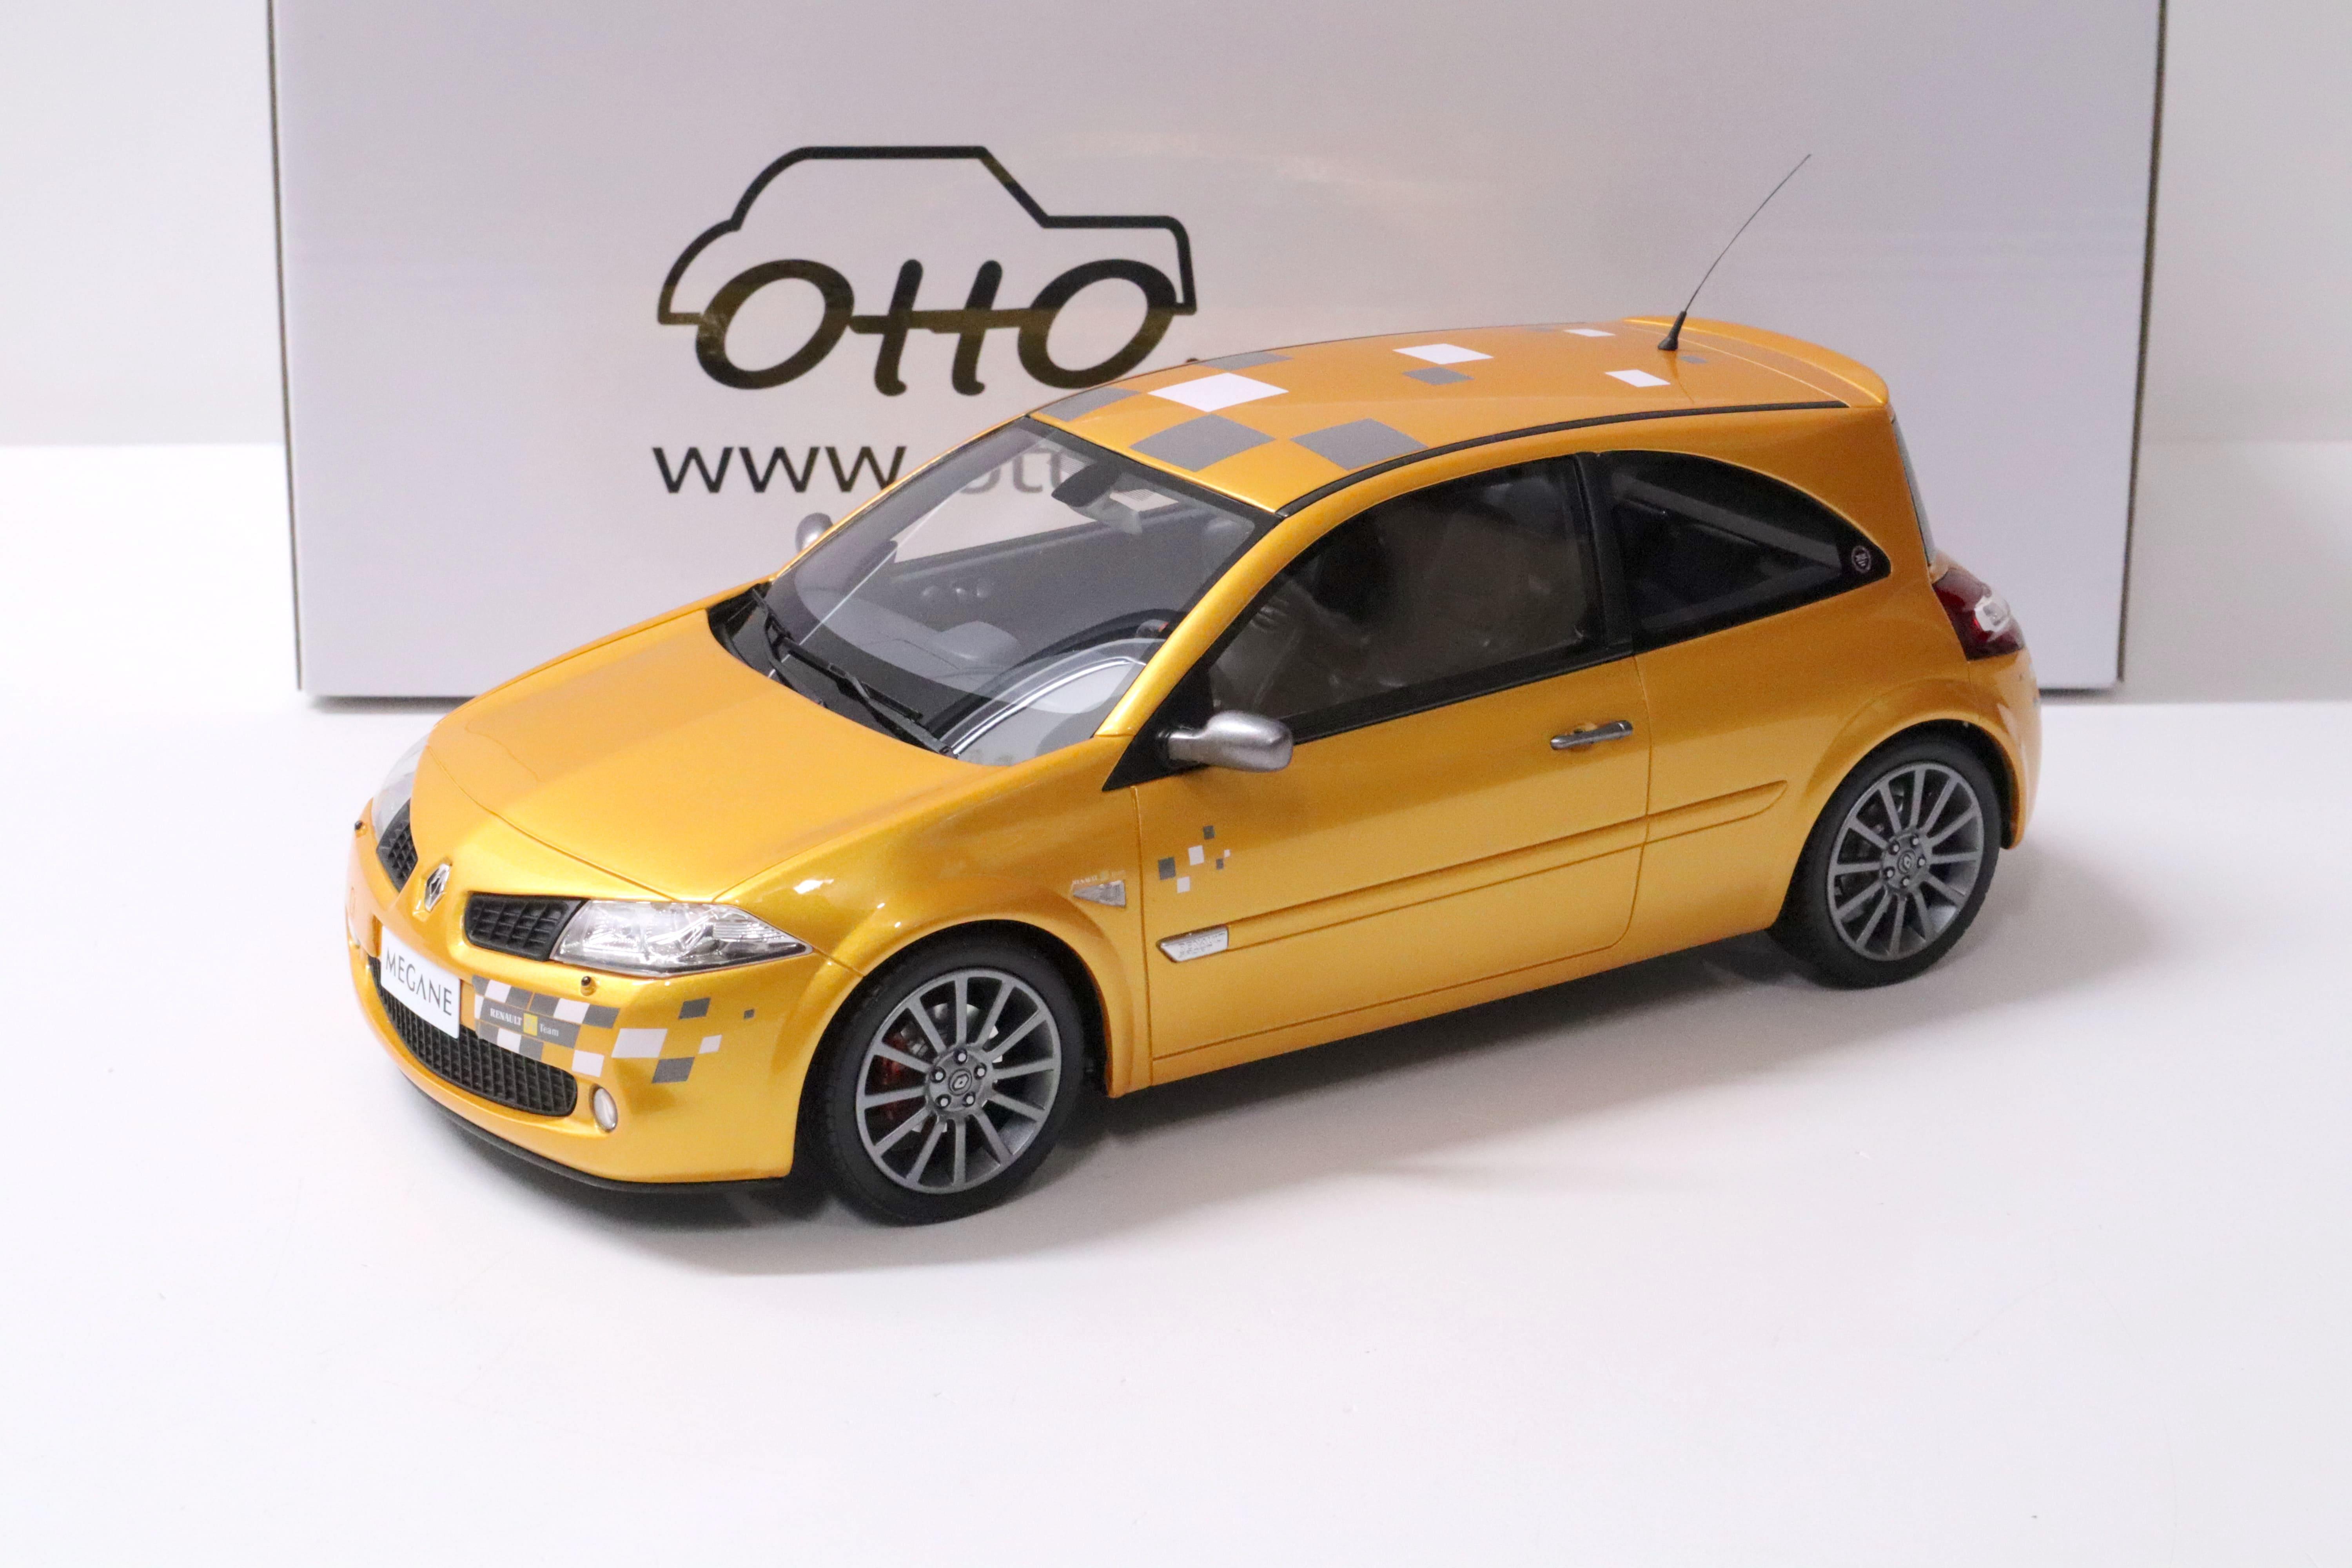 1:18 OTTO mobile OT914 Renault Megane RS Phase 2 Renault F1 Team Edition yellow